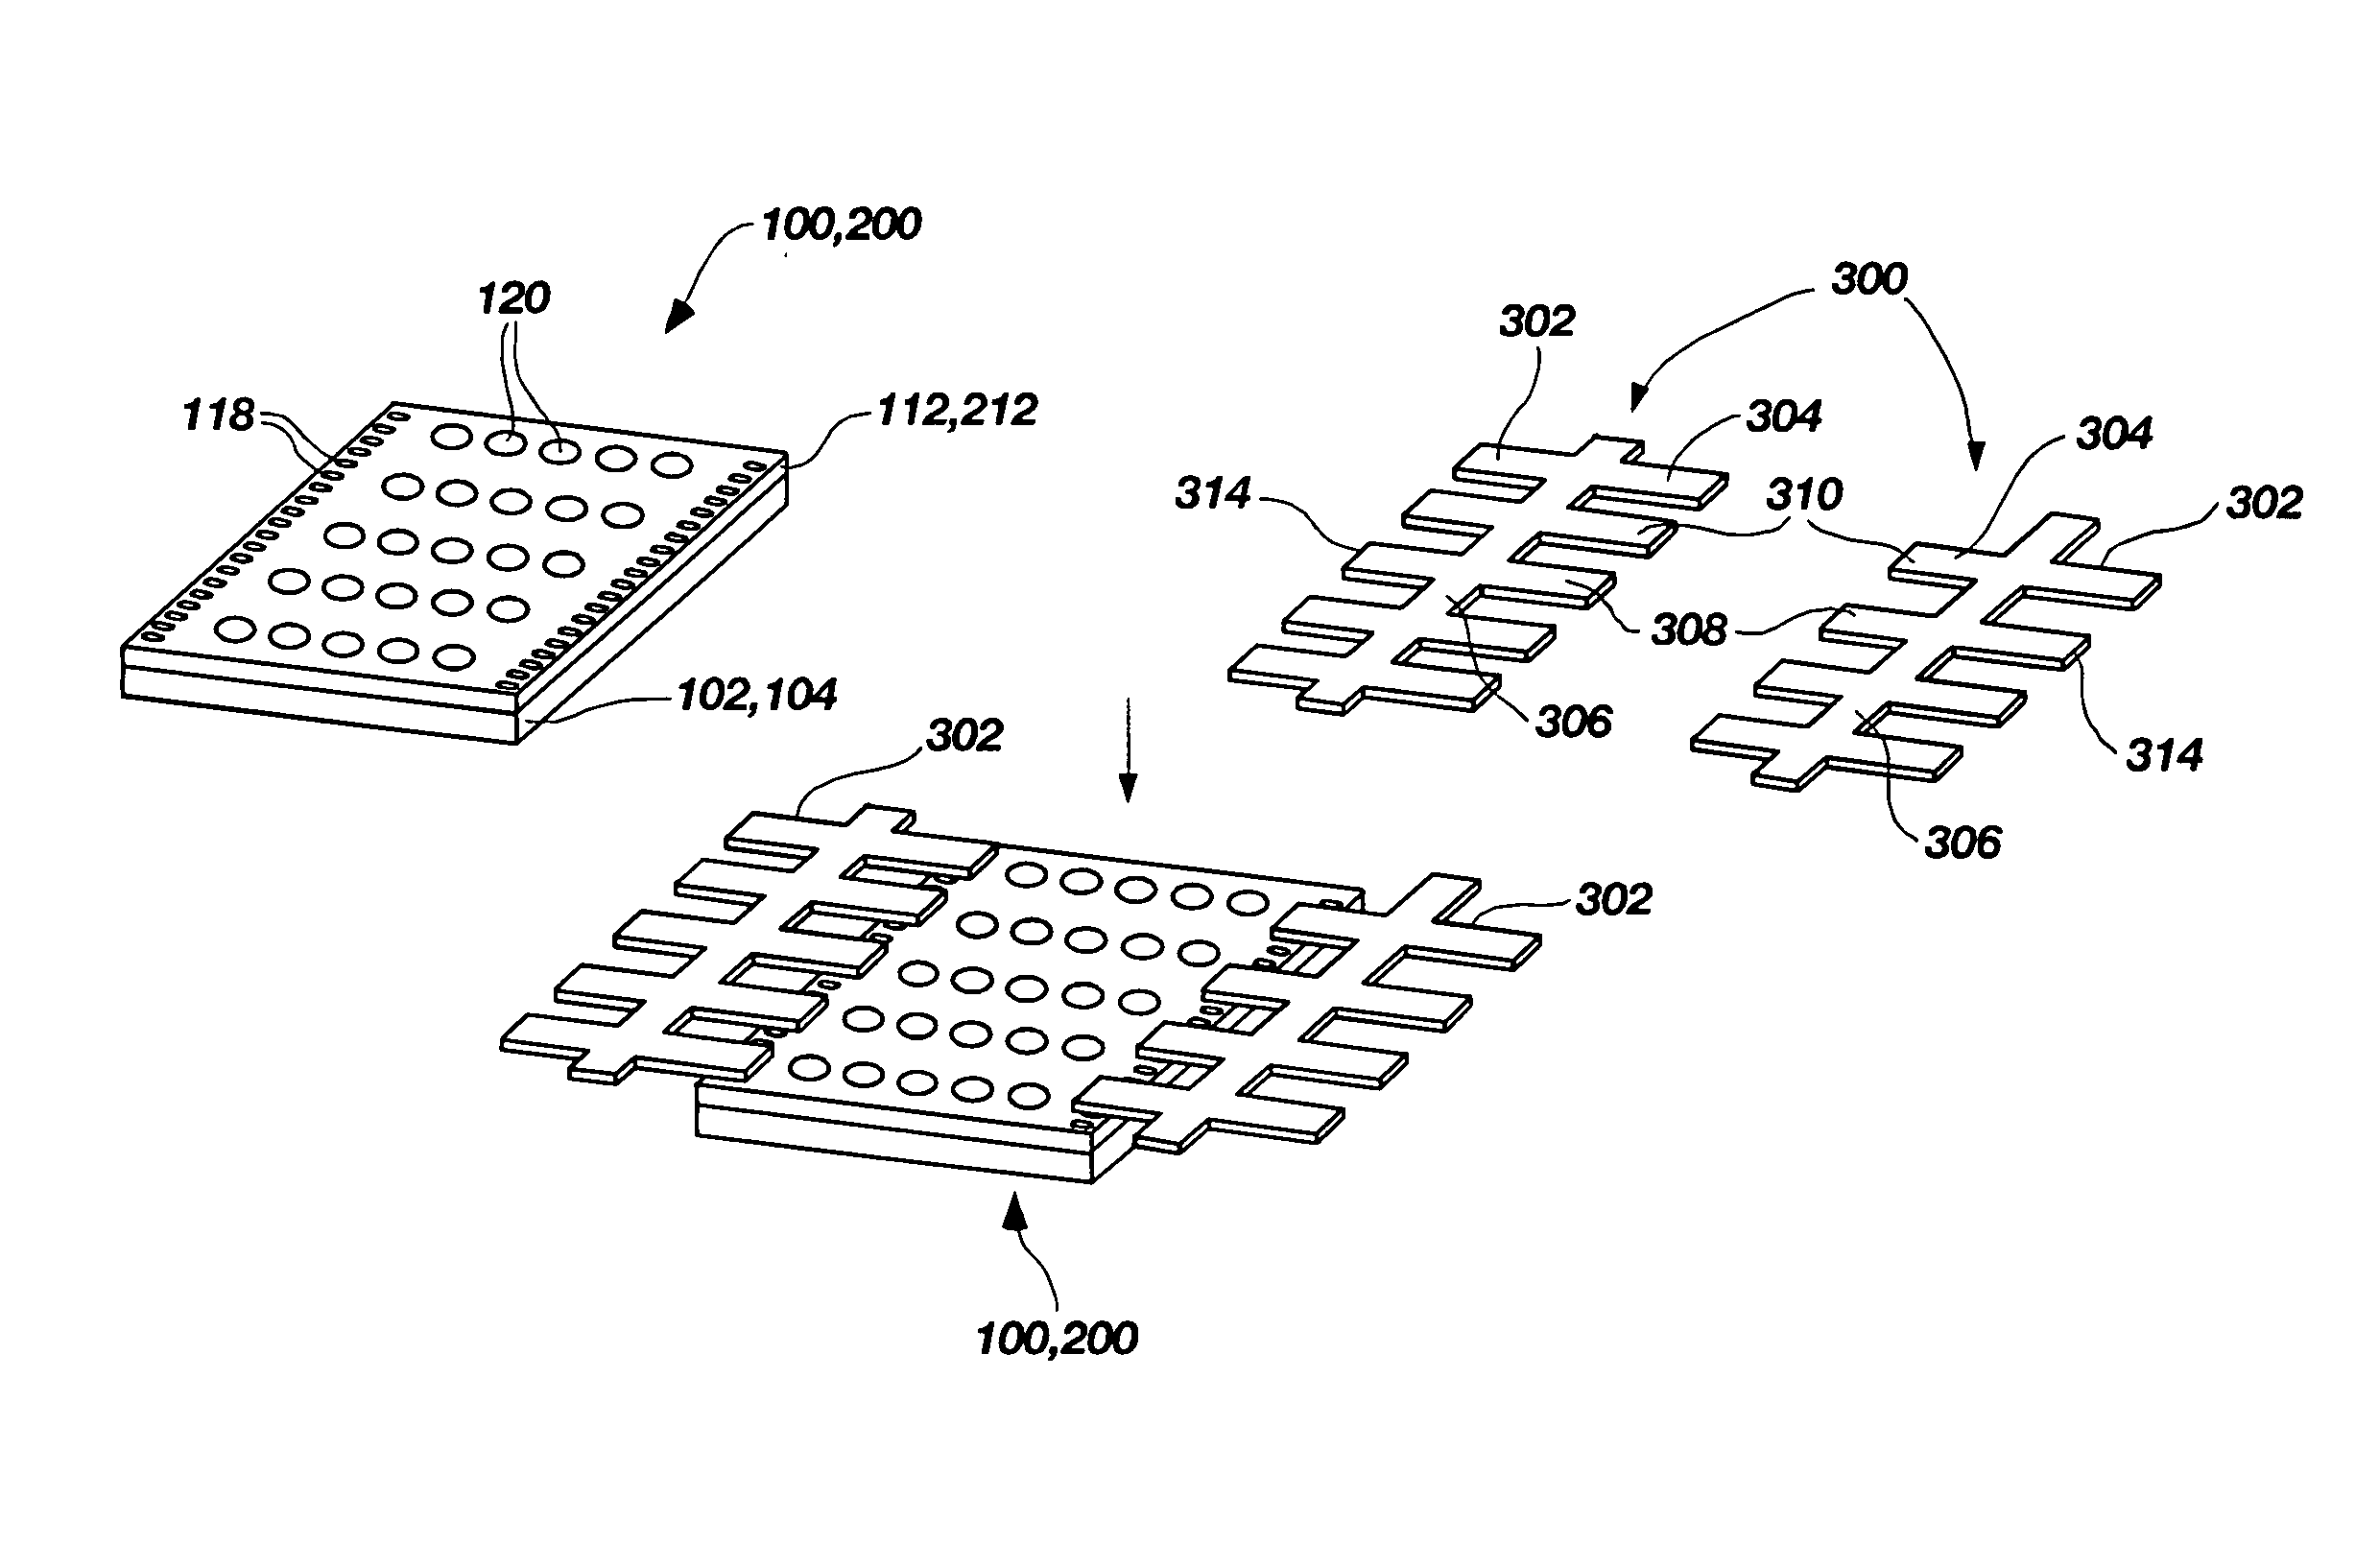 Land grid array semiconductor device packages